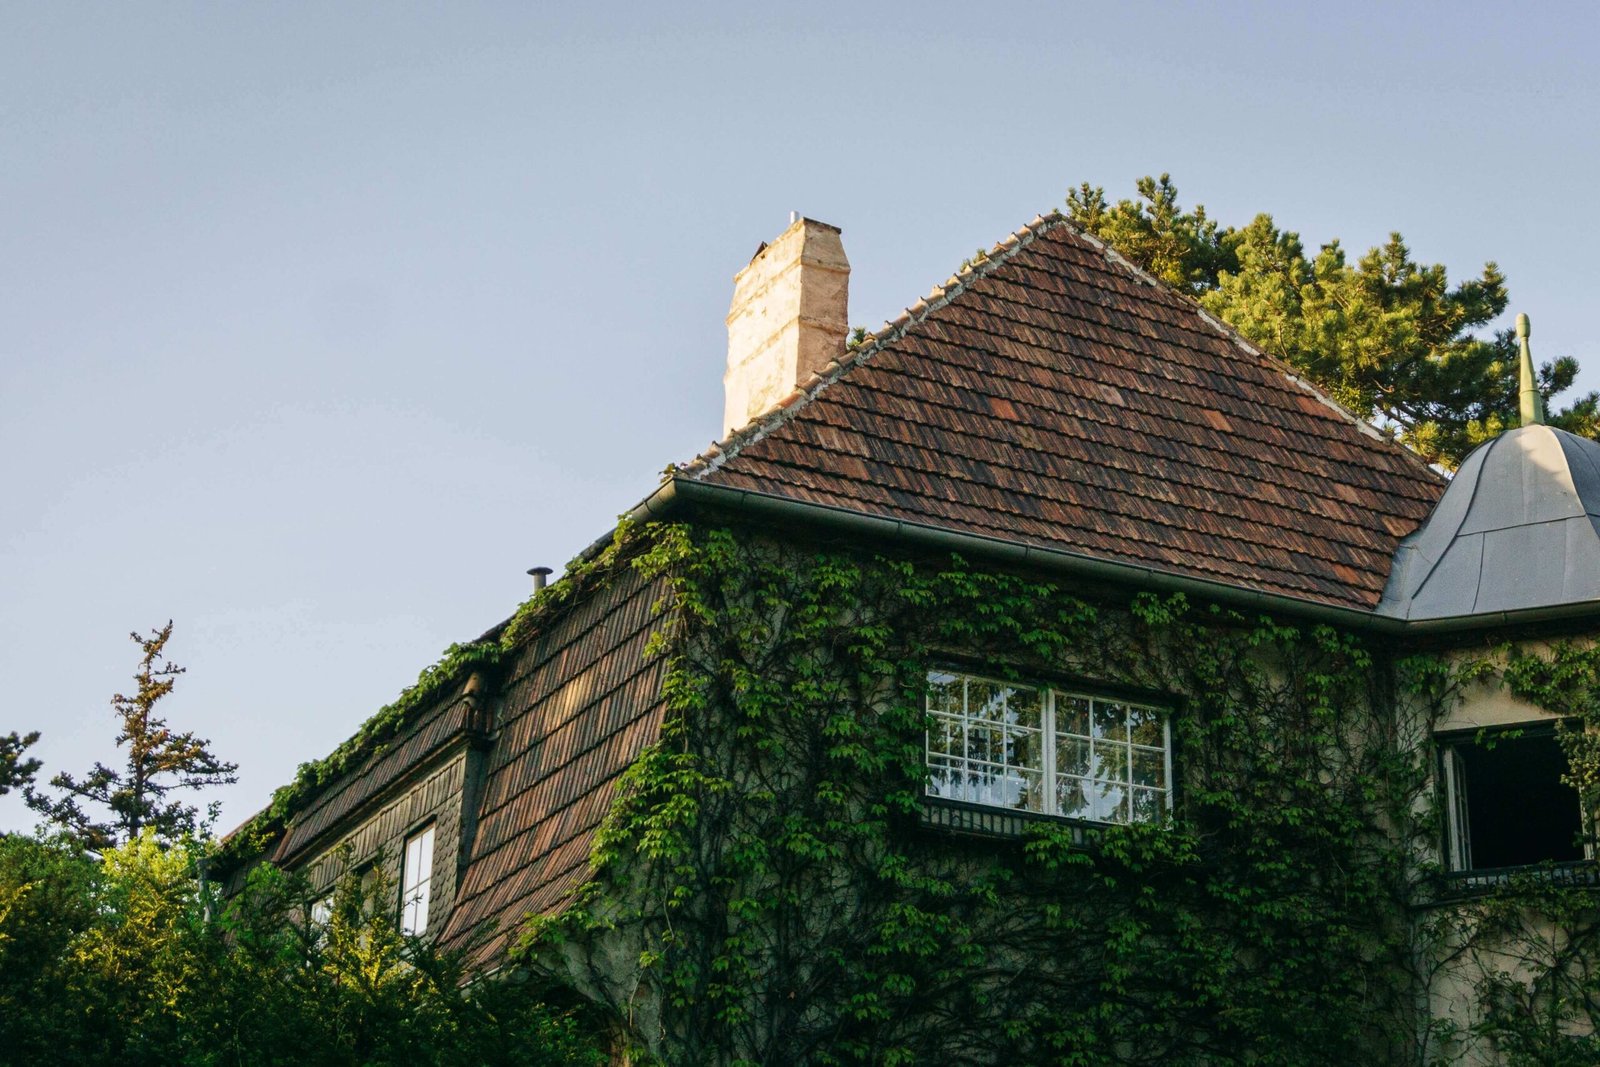 How to Remove Moss From Roof